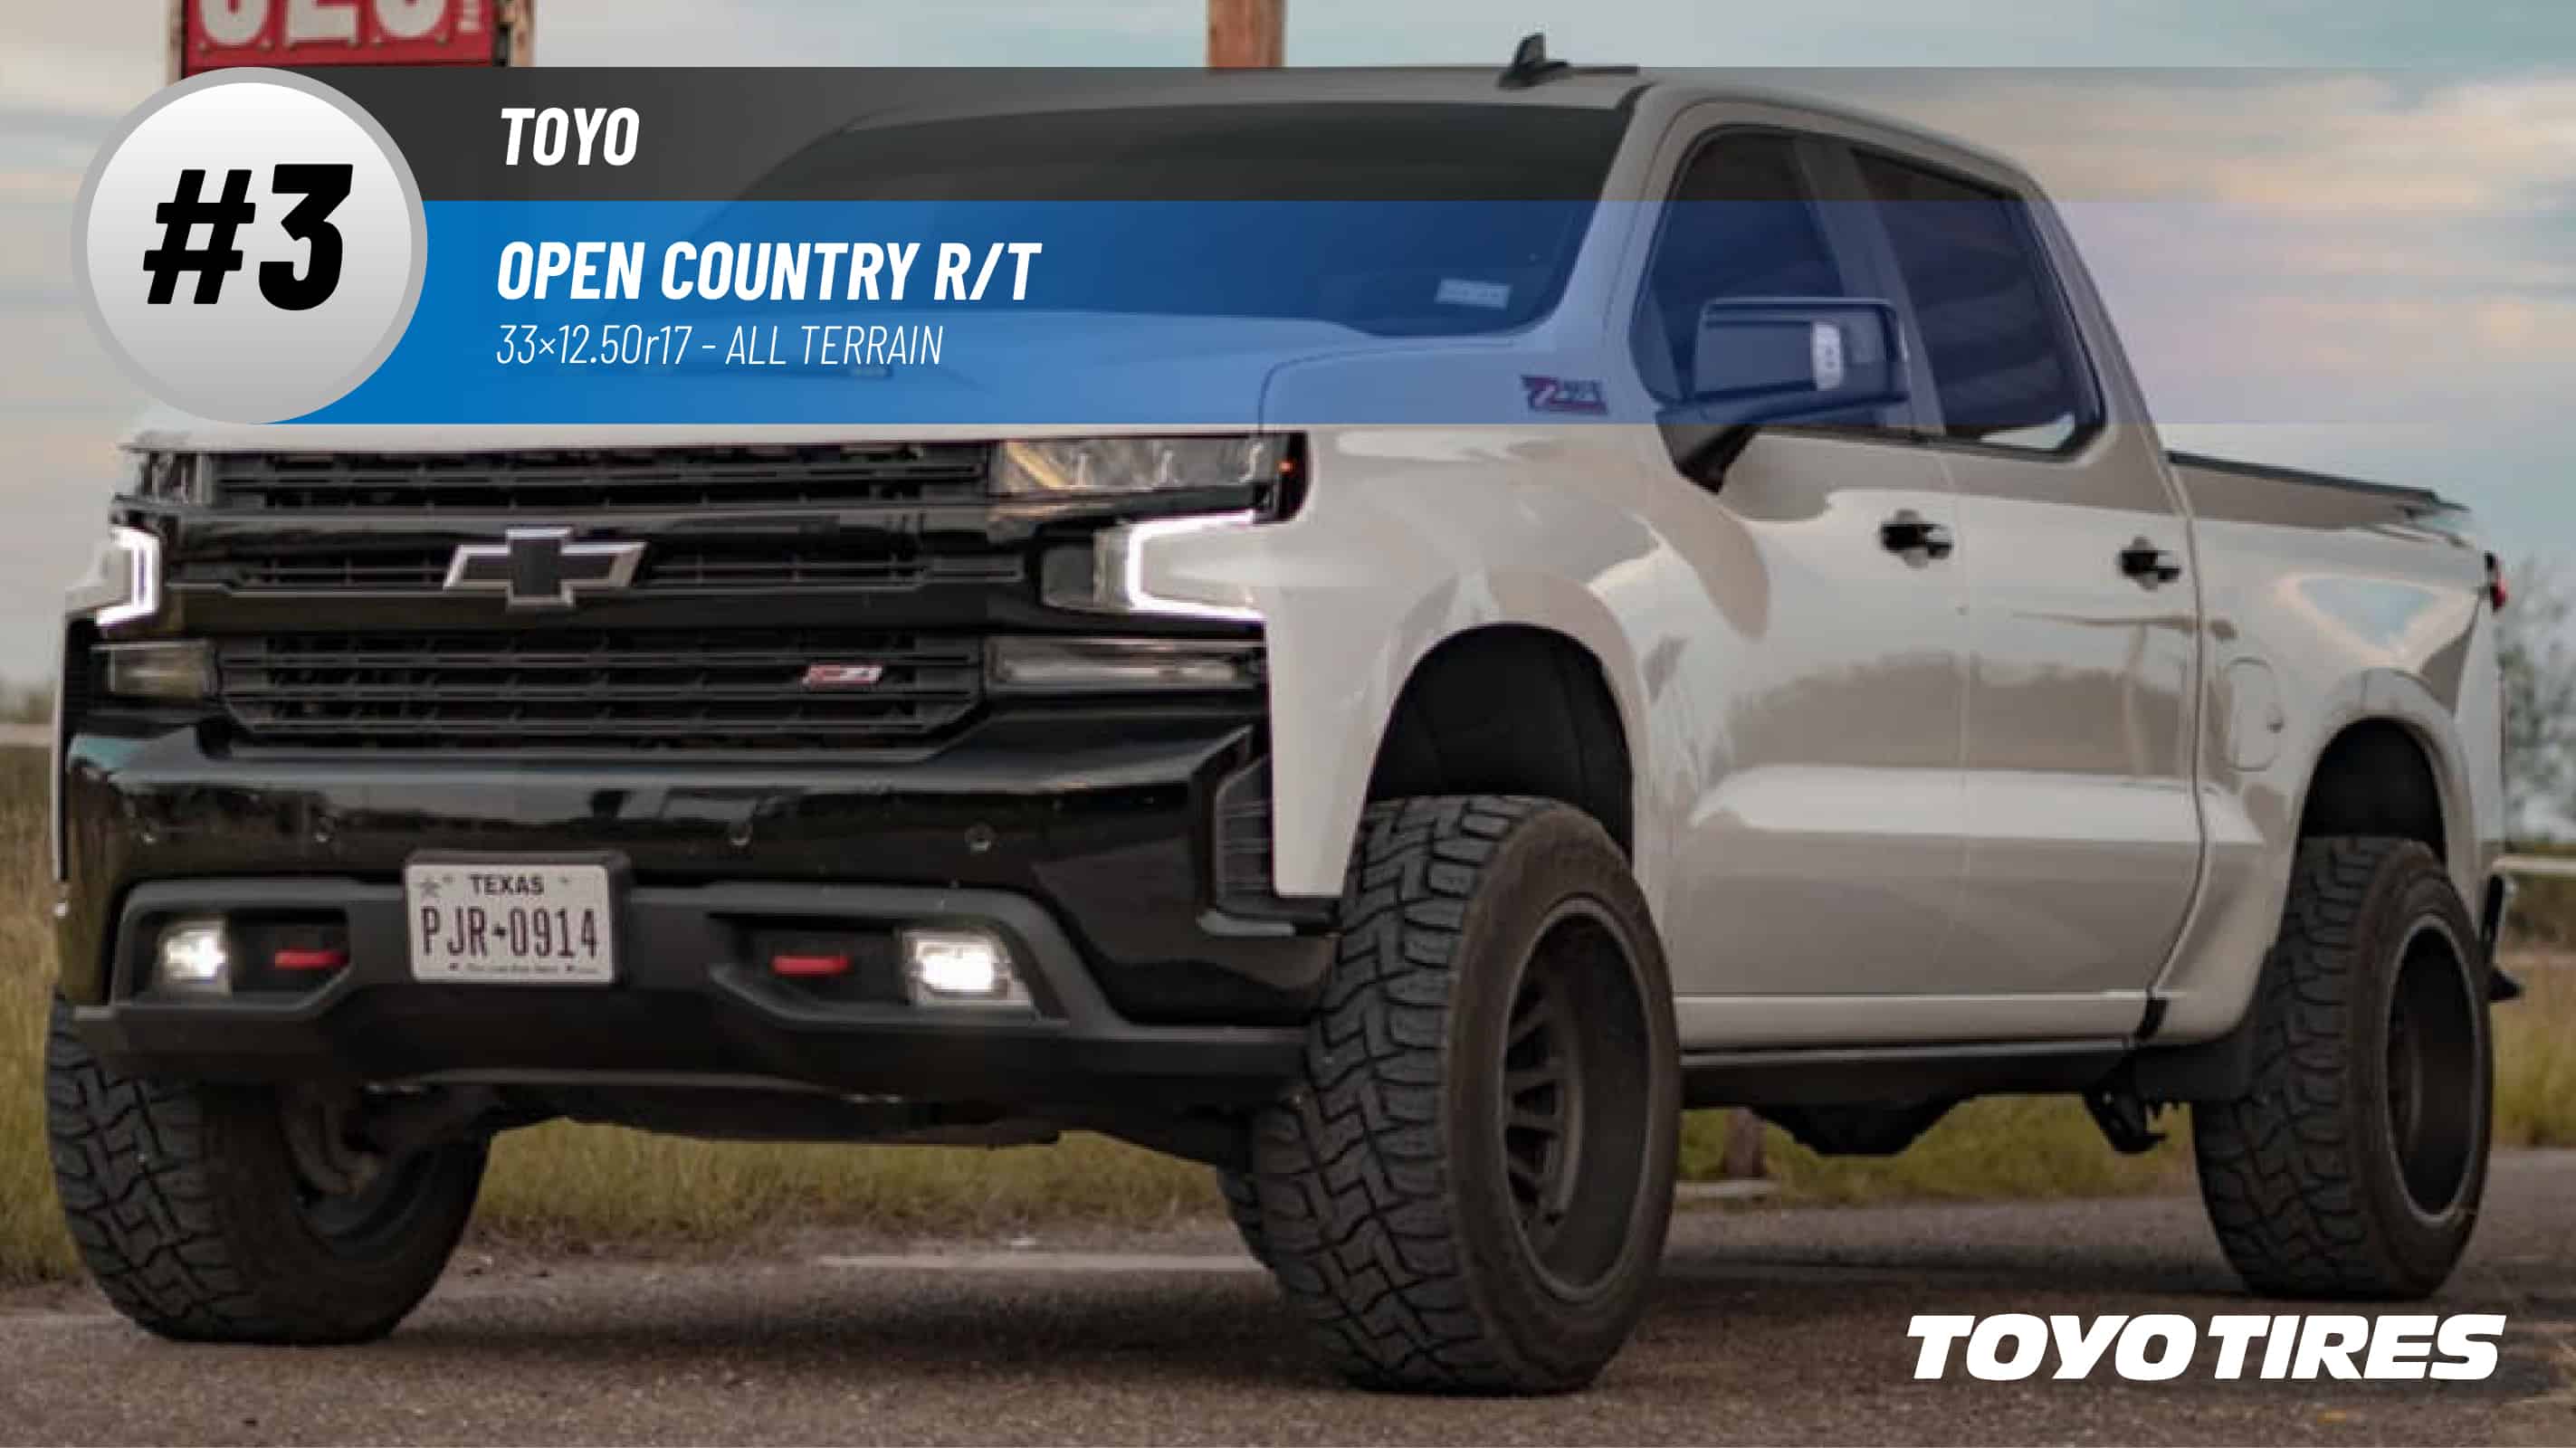 Top #3 All Terrain: Toyo Open Country R/T – 33x12.50r17